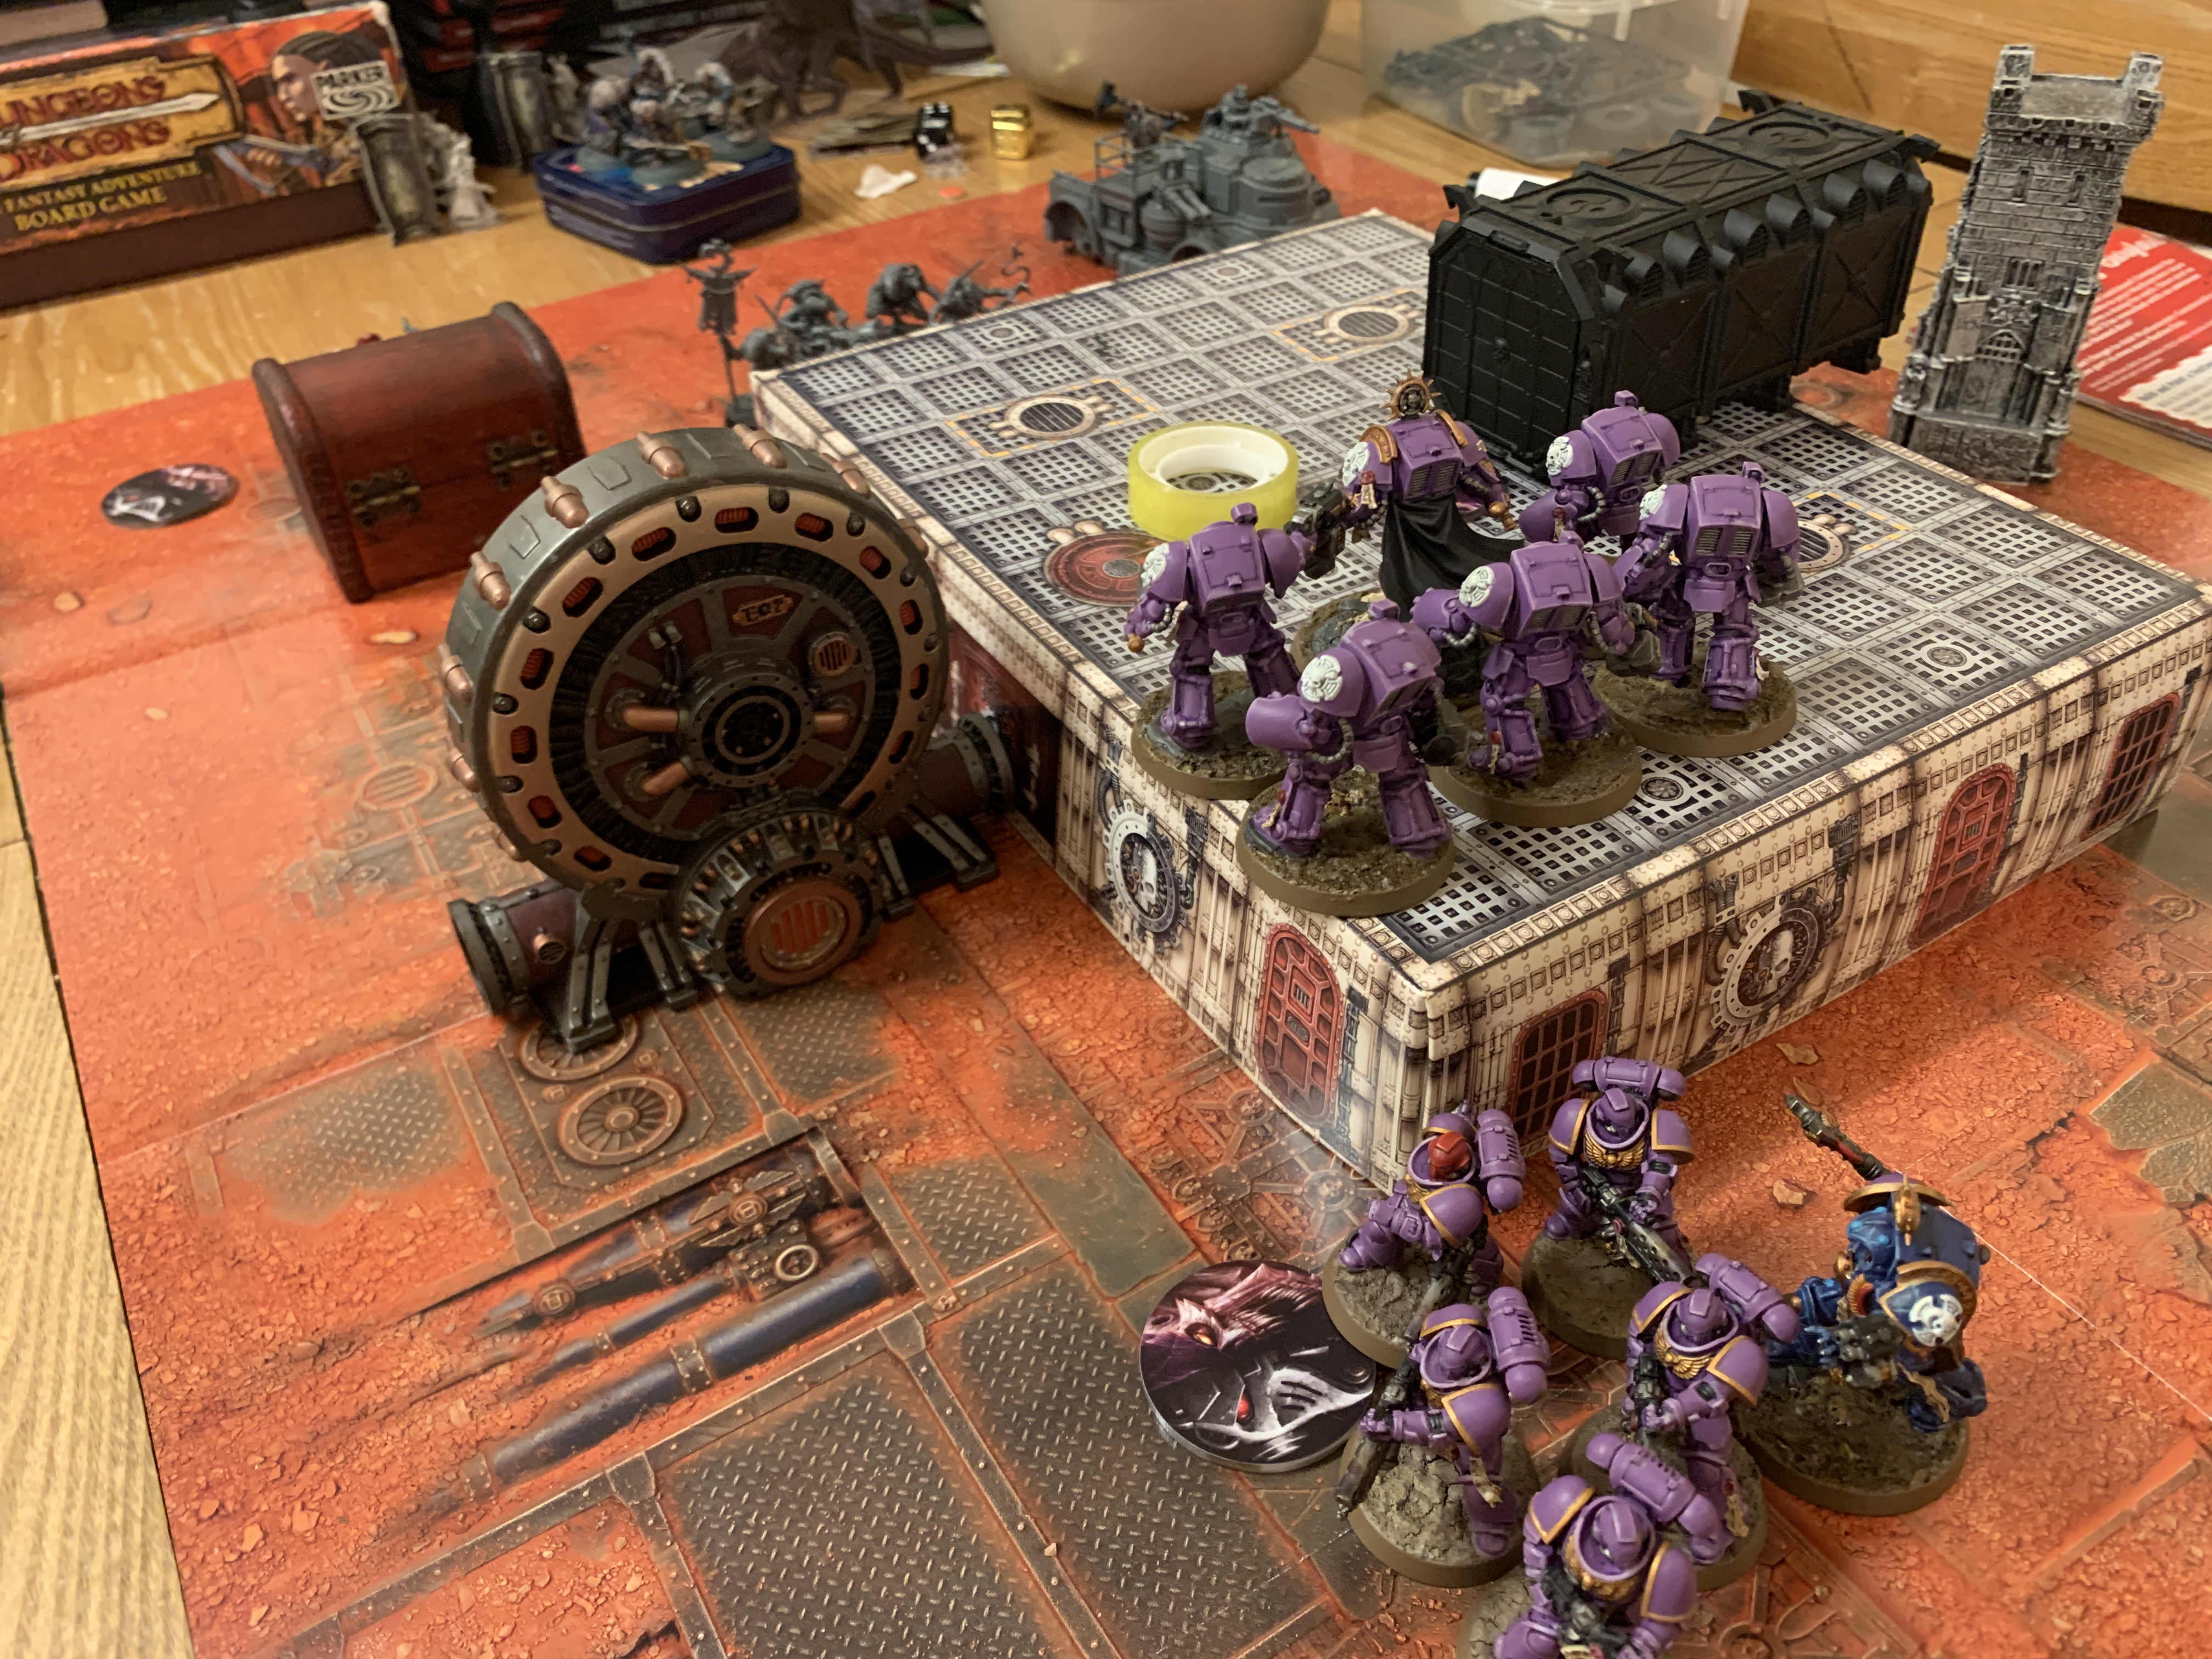 A battlefield split in the middle by a boxy bit of terrain that splits the area. On the lower area behind the terrain is a Genestealer truck and 5 Acolytes. On the terrain is six purple Space Marines in Terminator Armour. At the front on the lower level are 5 Infernus Marines in purple armour and a Librarian in dark blue armour. The battle field has several other terrain features, including some boxes, creates and a circular power generator